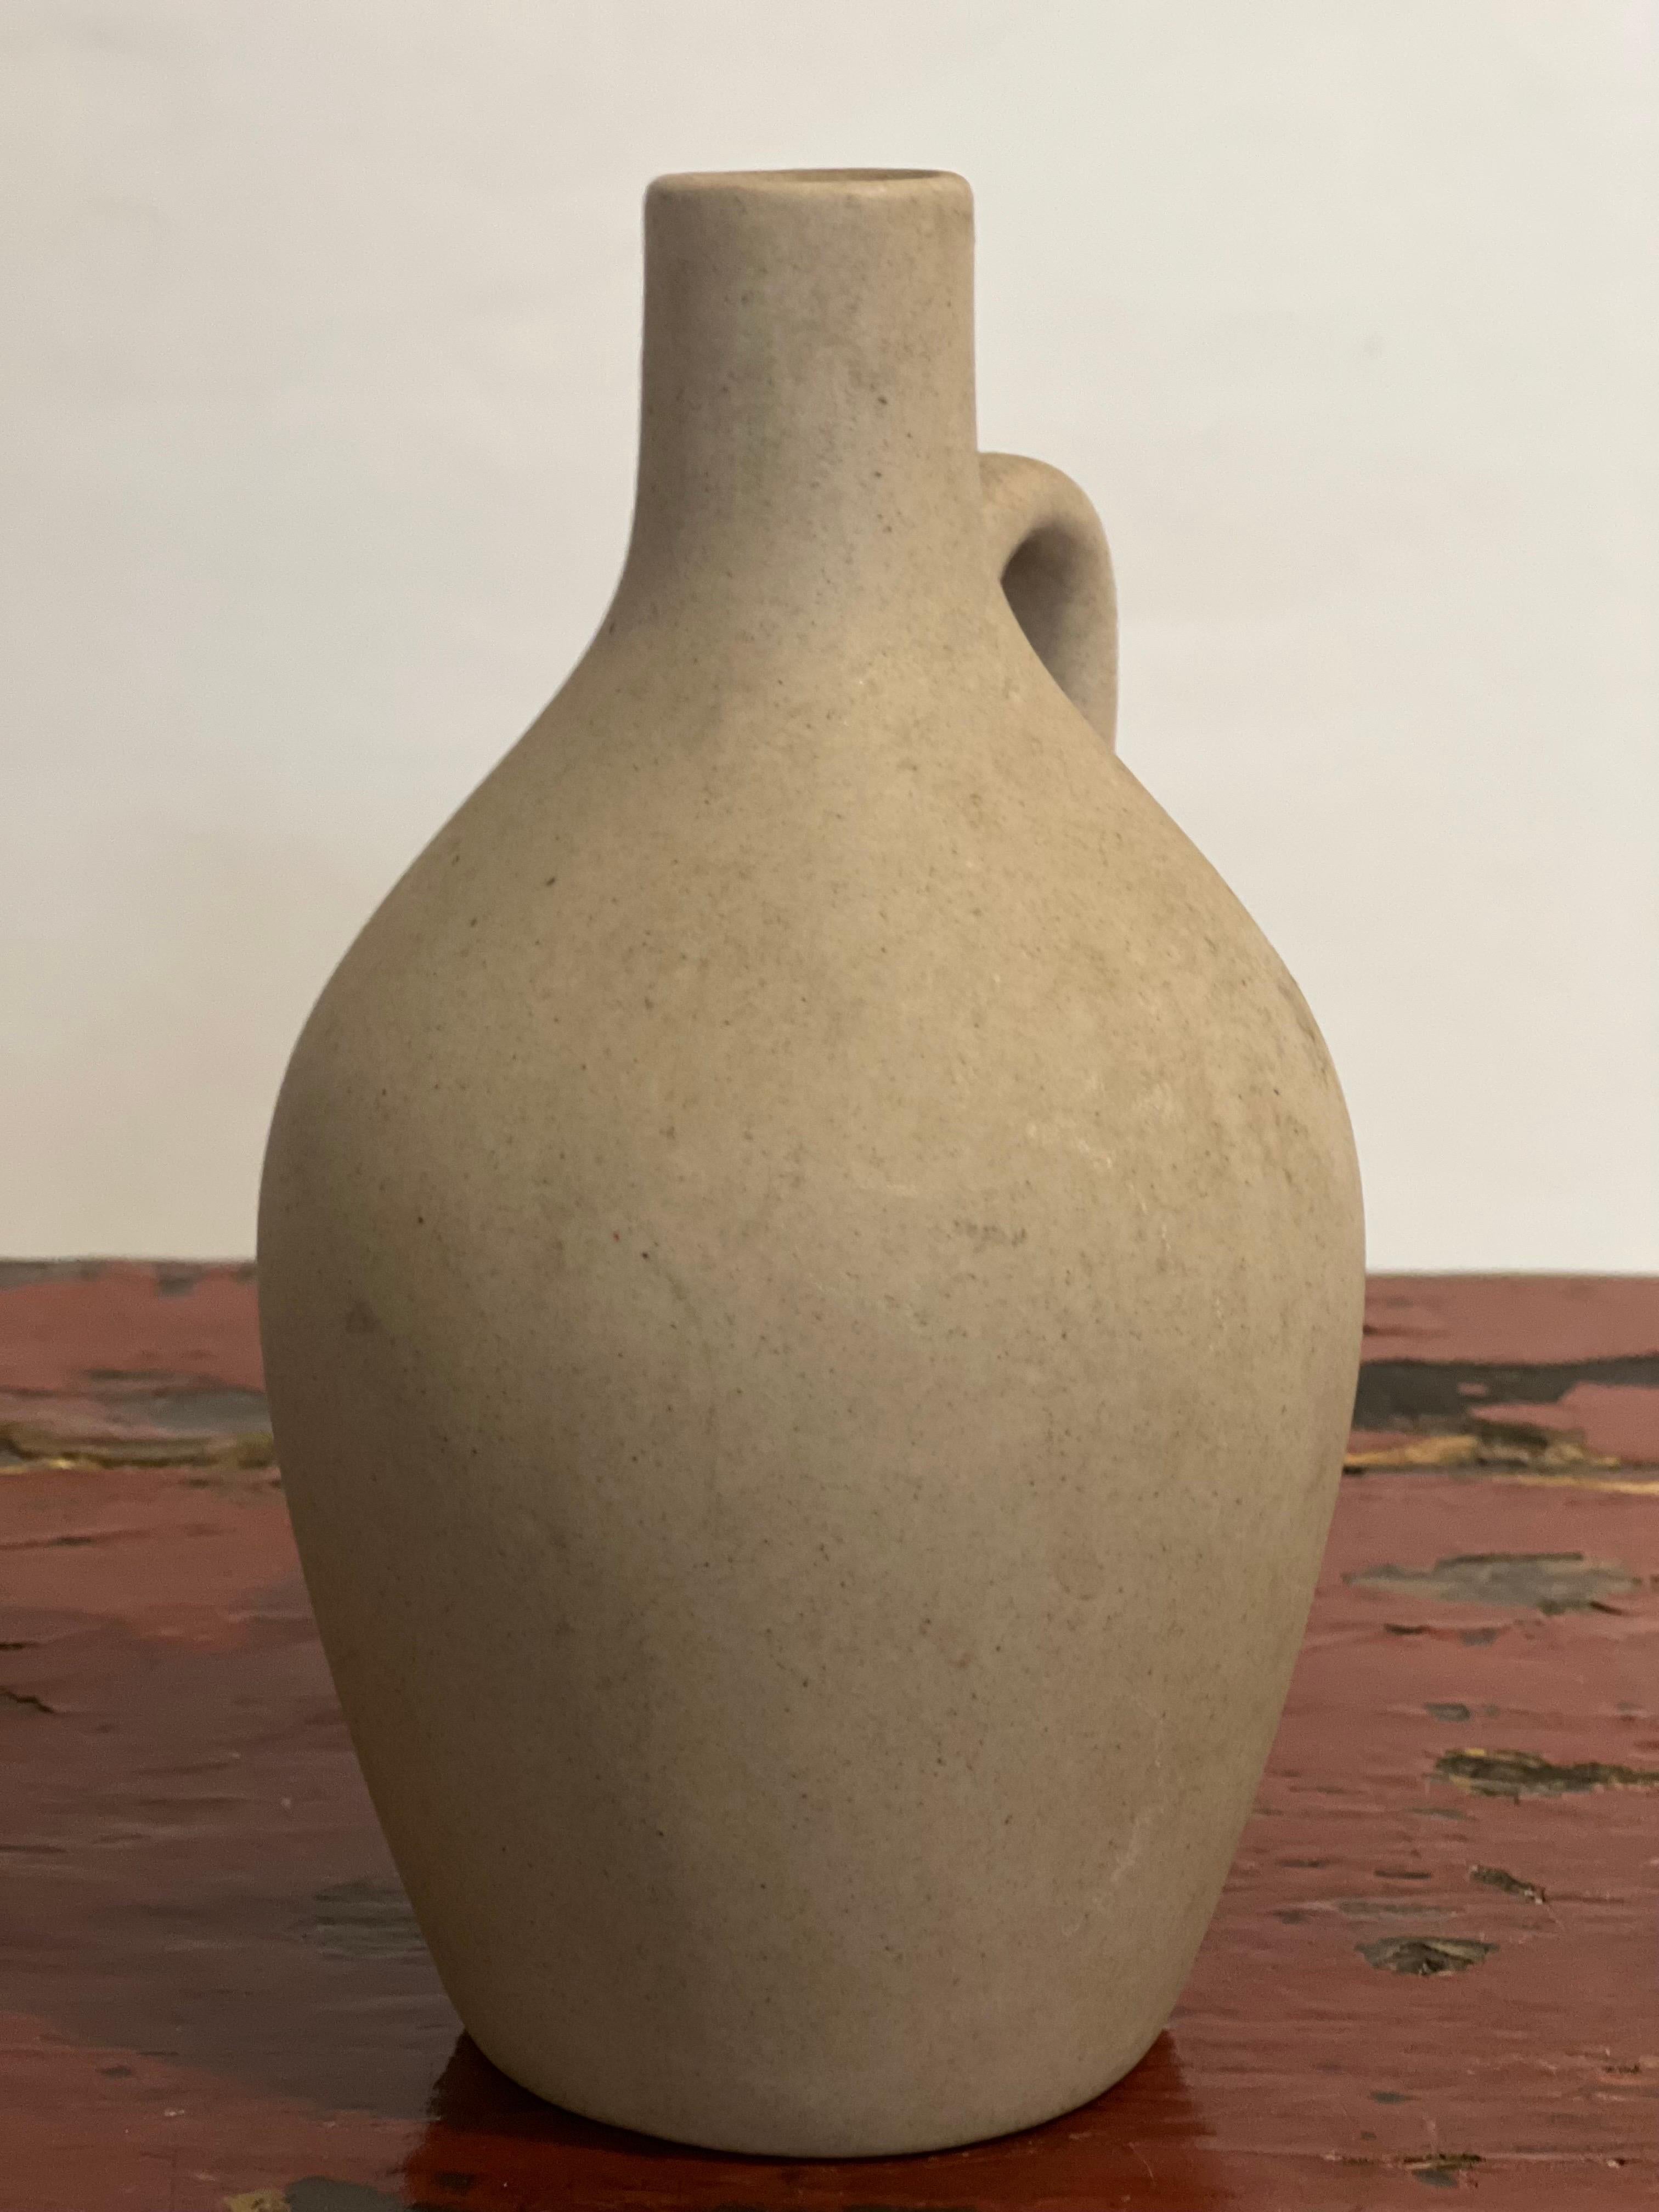 Mid-20th century small stoneware jug by Pigeon Forge Pottery, Tennessee.

Signed on the bottom, this adorable, matte beige jug has been handcrafted and individually fired. Perfect as a bud vase with a minimalist single flower or small arrangement.